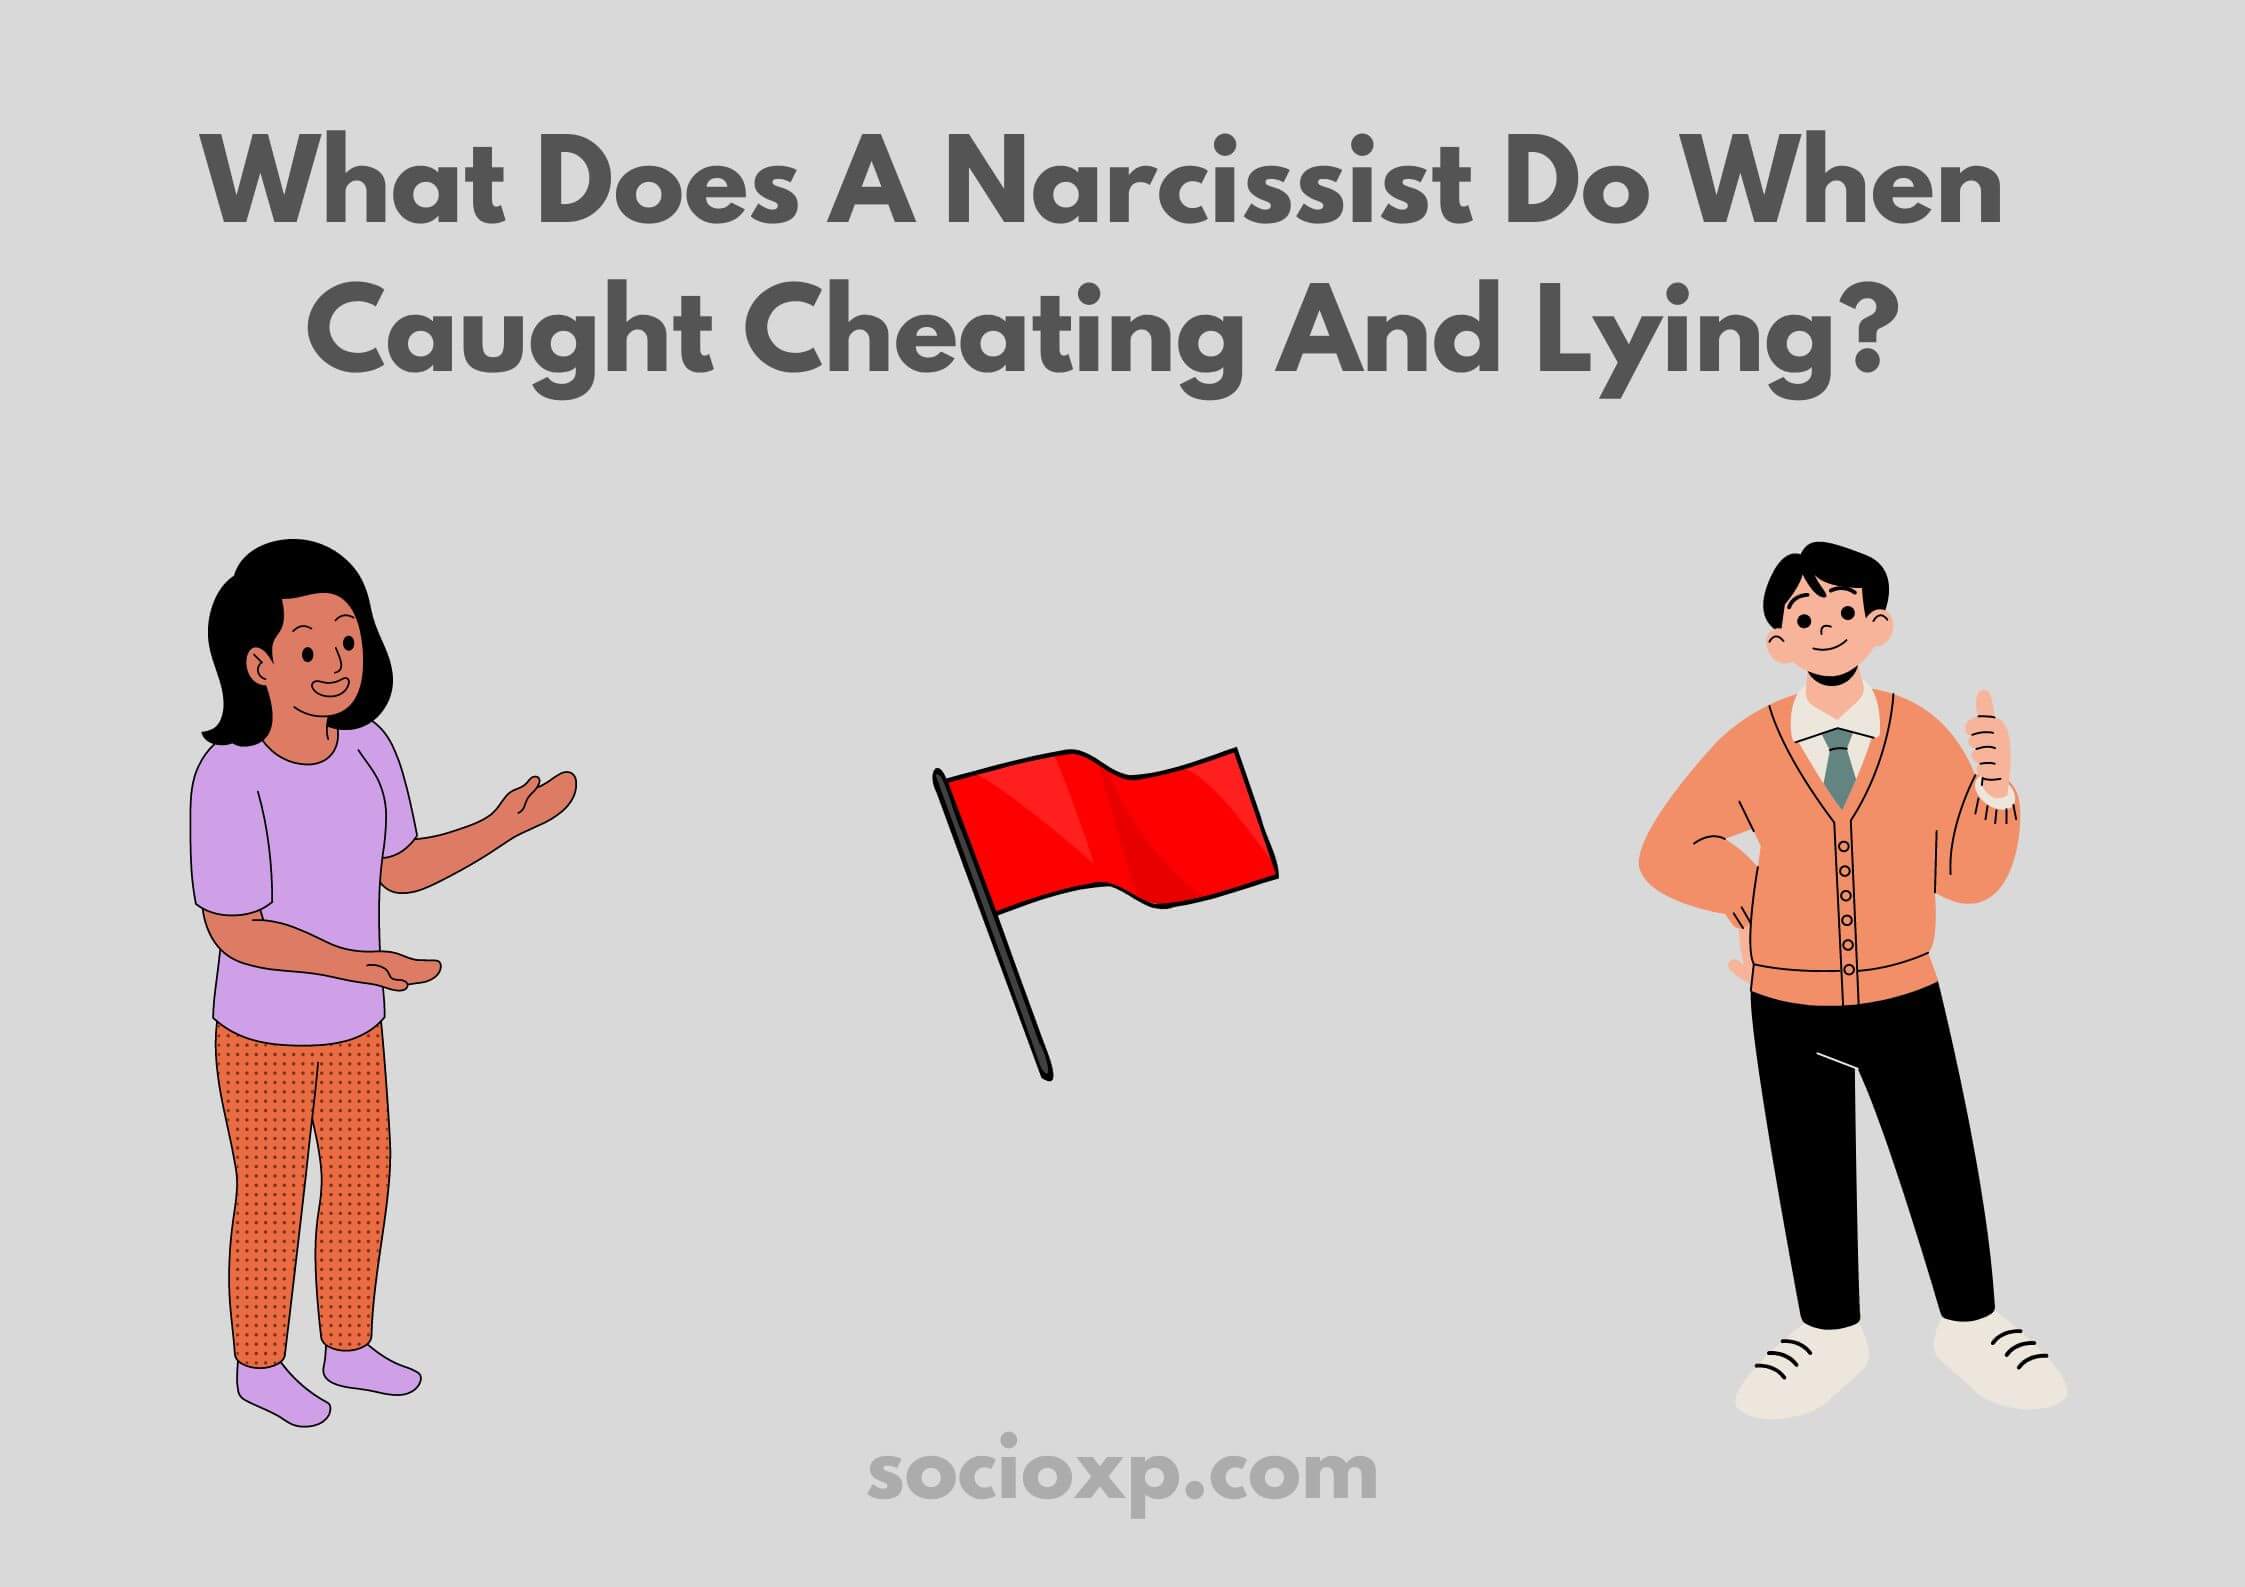 What Does A Narcissist Do When Caught Cheating And Lying?